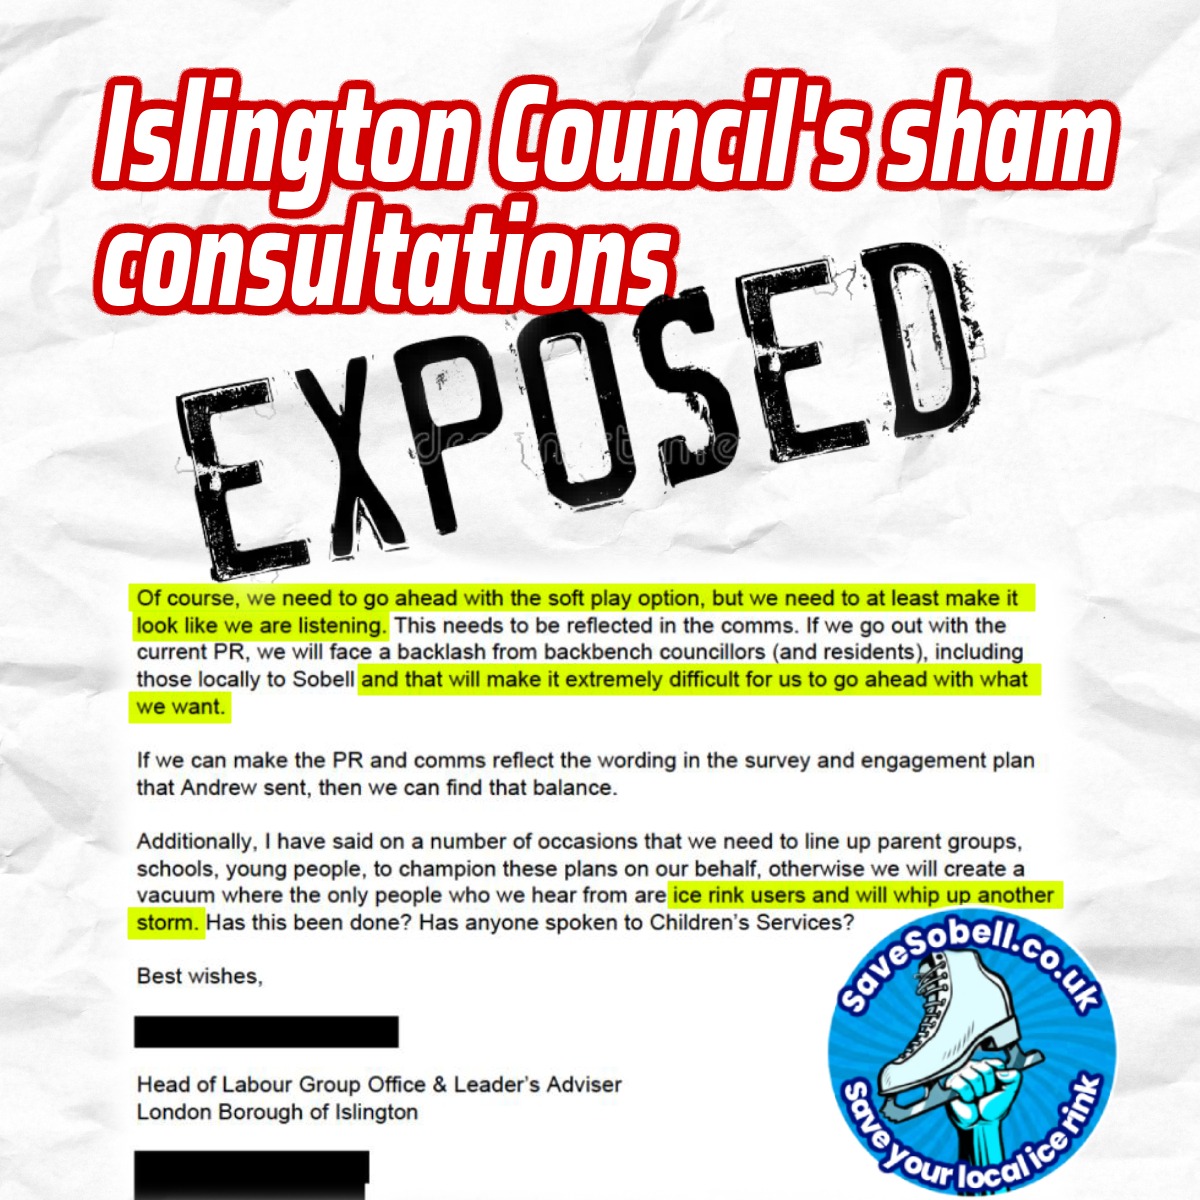 Islington Labour Councilors are a bunch of crooks. Either really amateur/dumb or not even attempting to hide how these public consultations are a sham...

#savesobellicerink
#savesobell
#saveouricerink